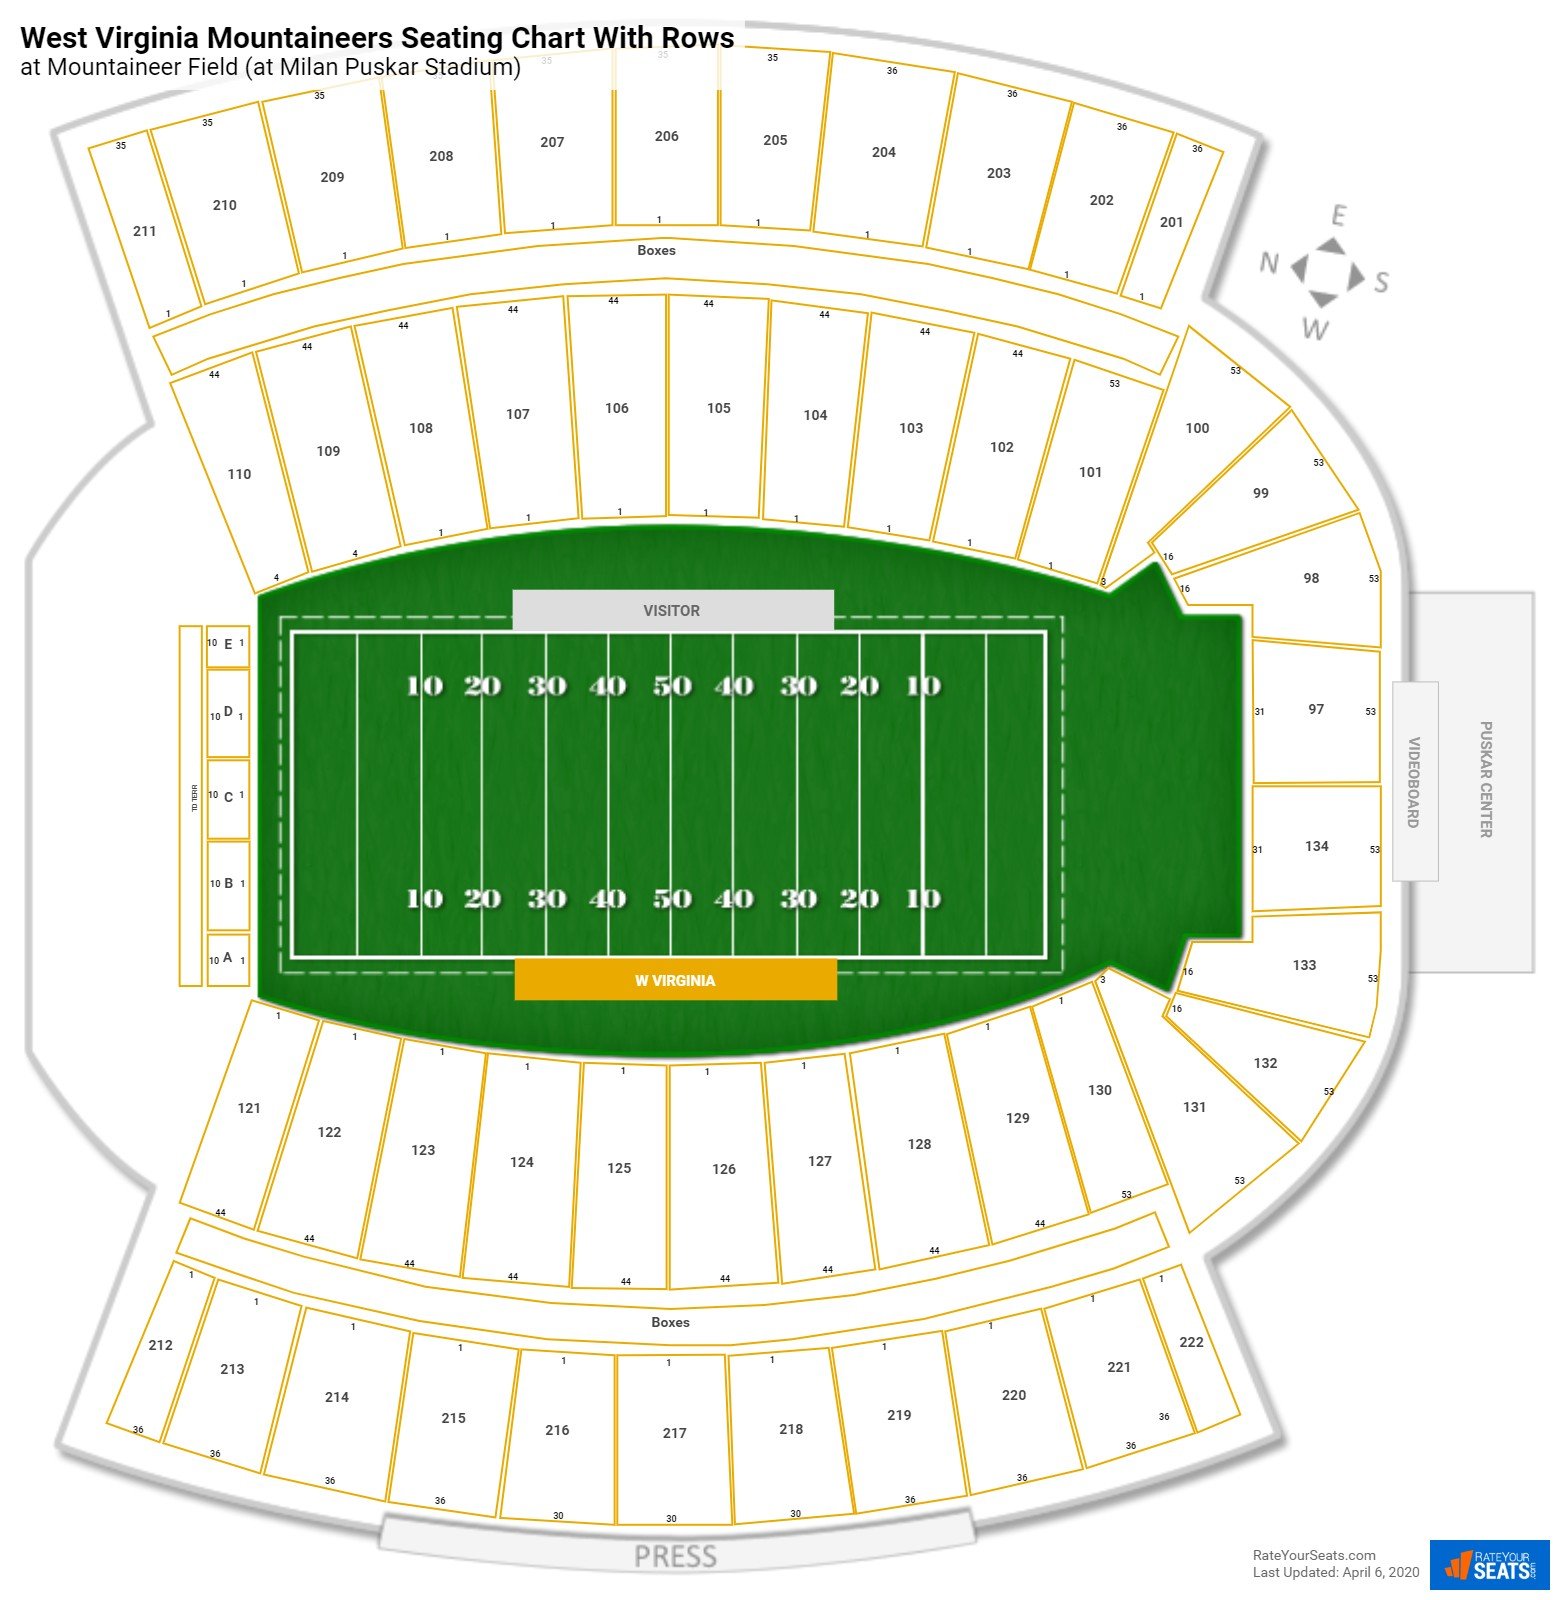 Mountaineer Field seating chart with row numbers